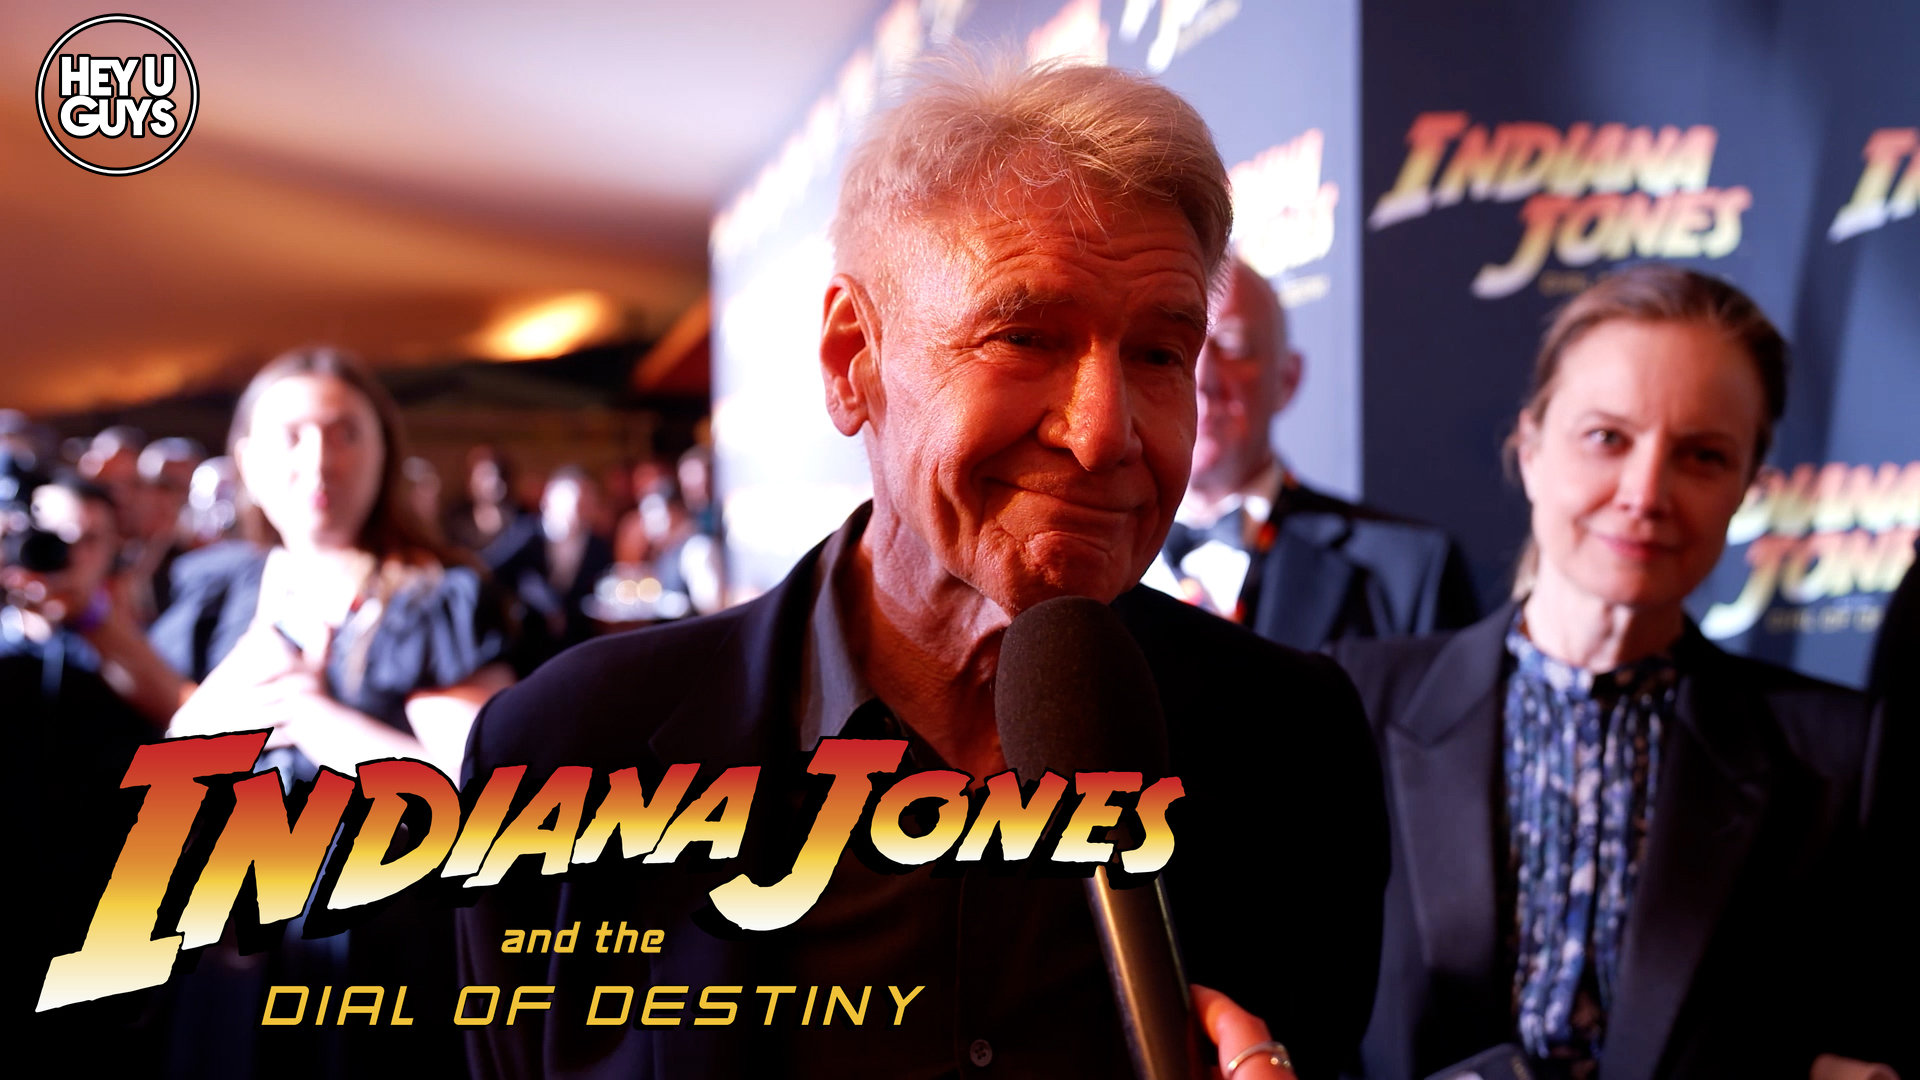 Harrison-Ford---Indiana-Jones-and-the-Dial-of-Destiny